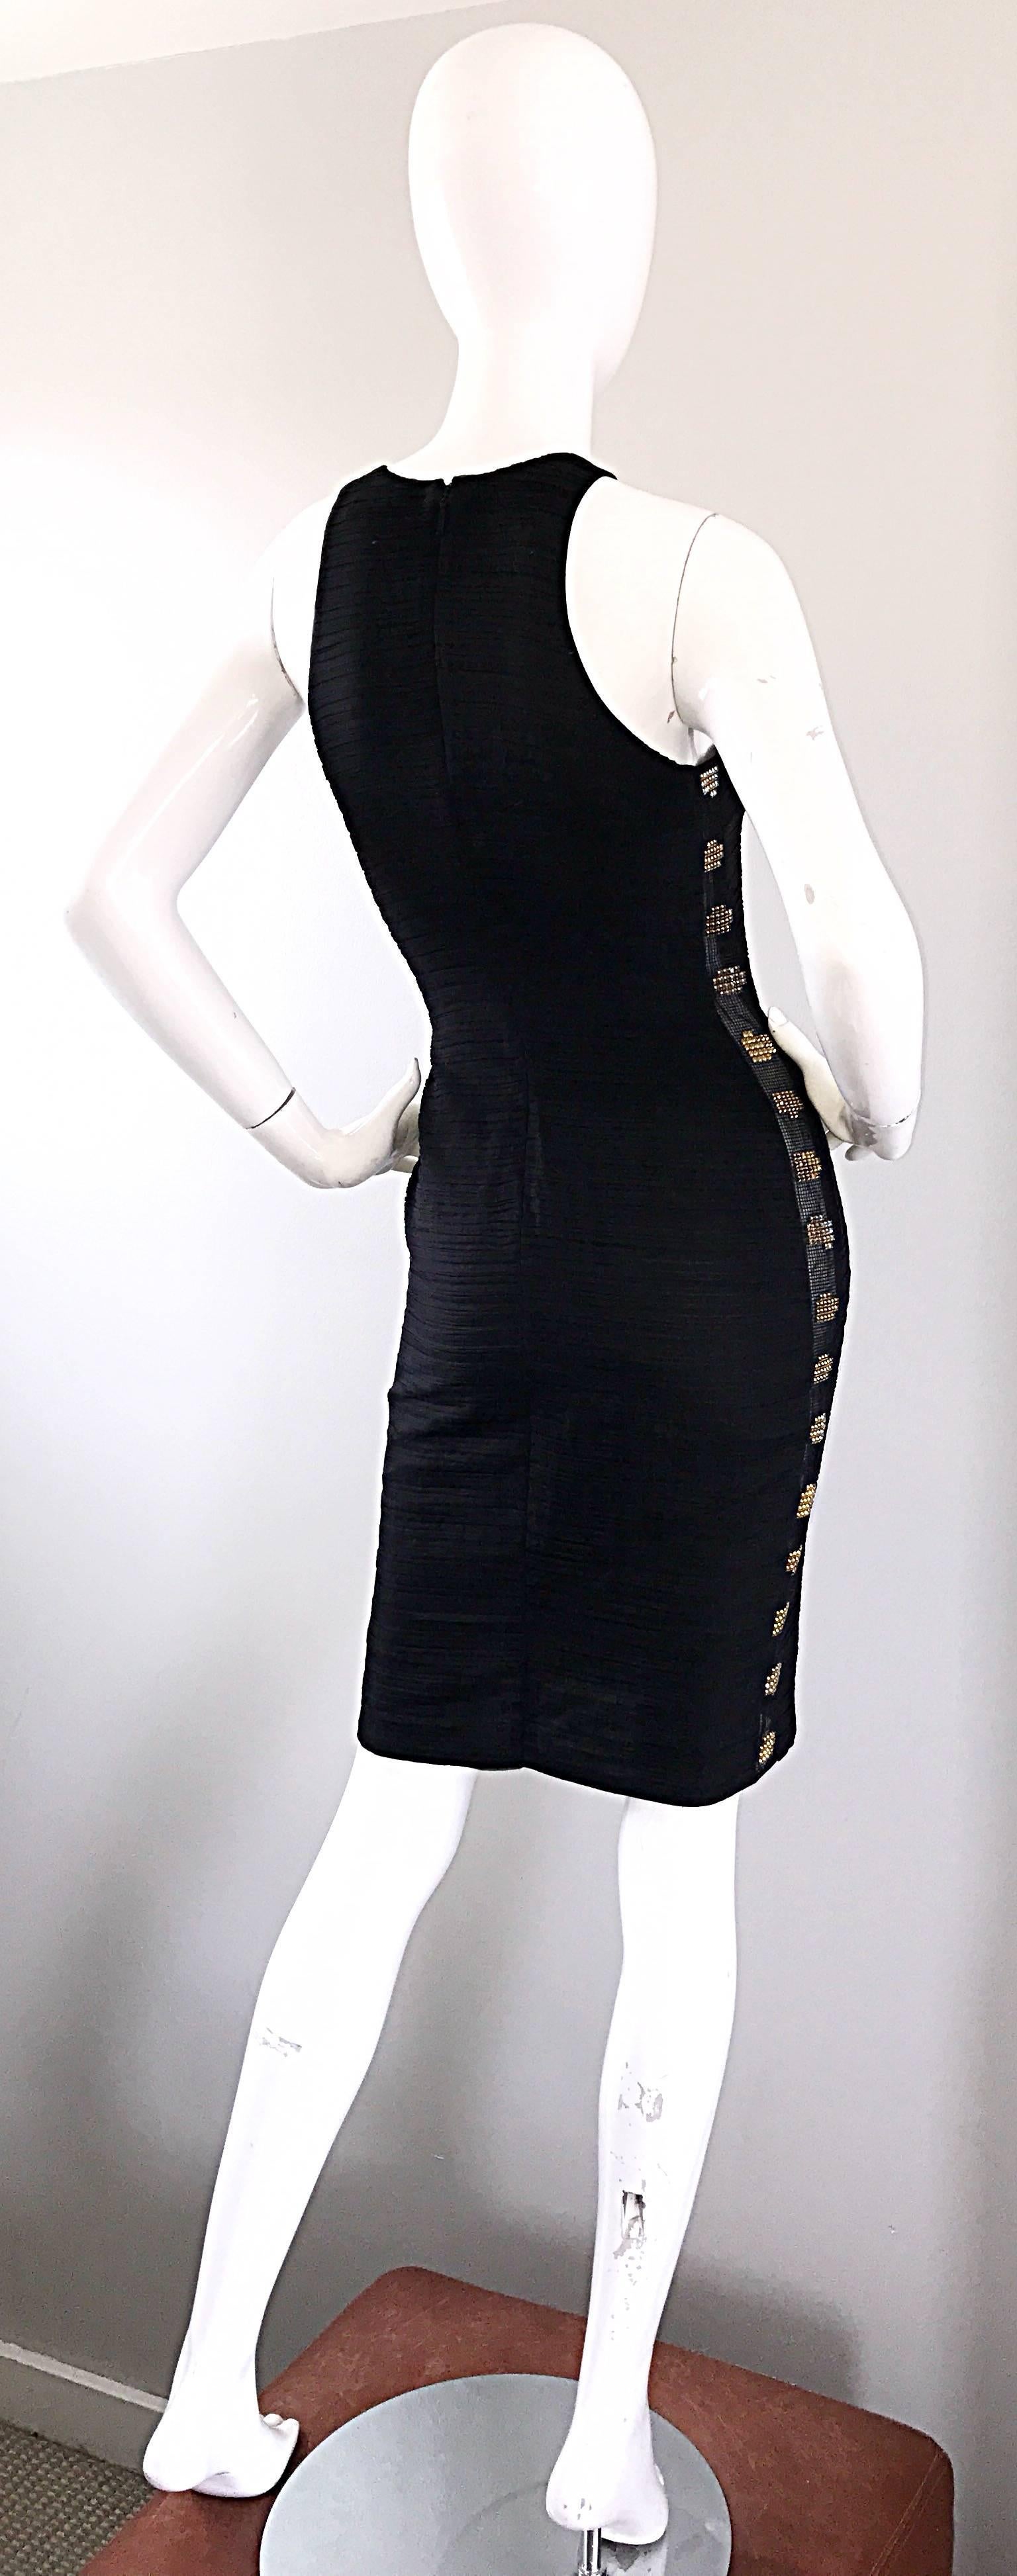 2000s Gianni Versace Black Silk Side Cut Out Rhinestone Bodycon Vintage Dress  In Excellent Condition For Sale In San Diego, CA